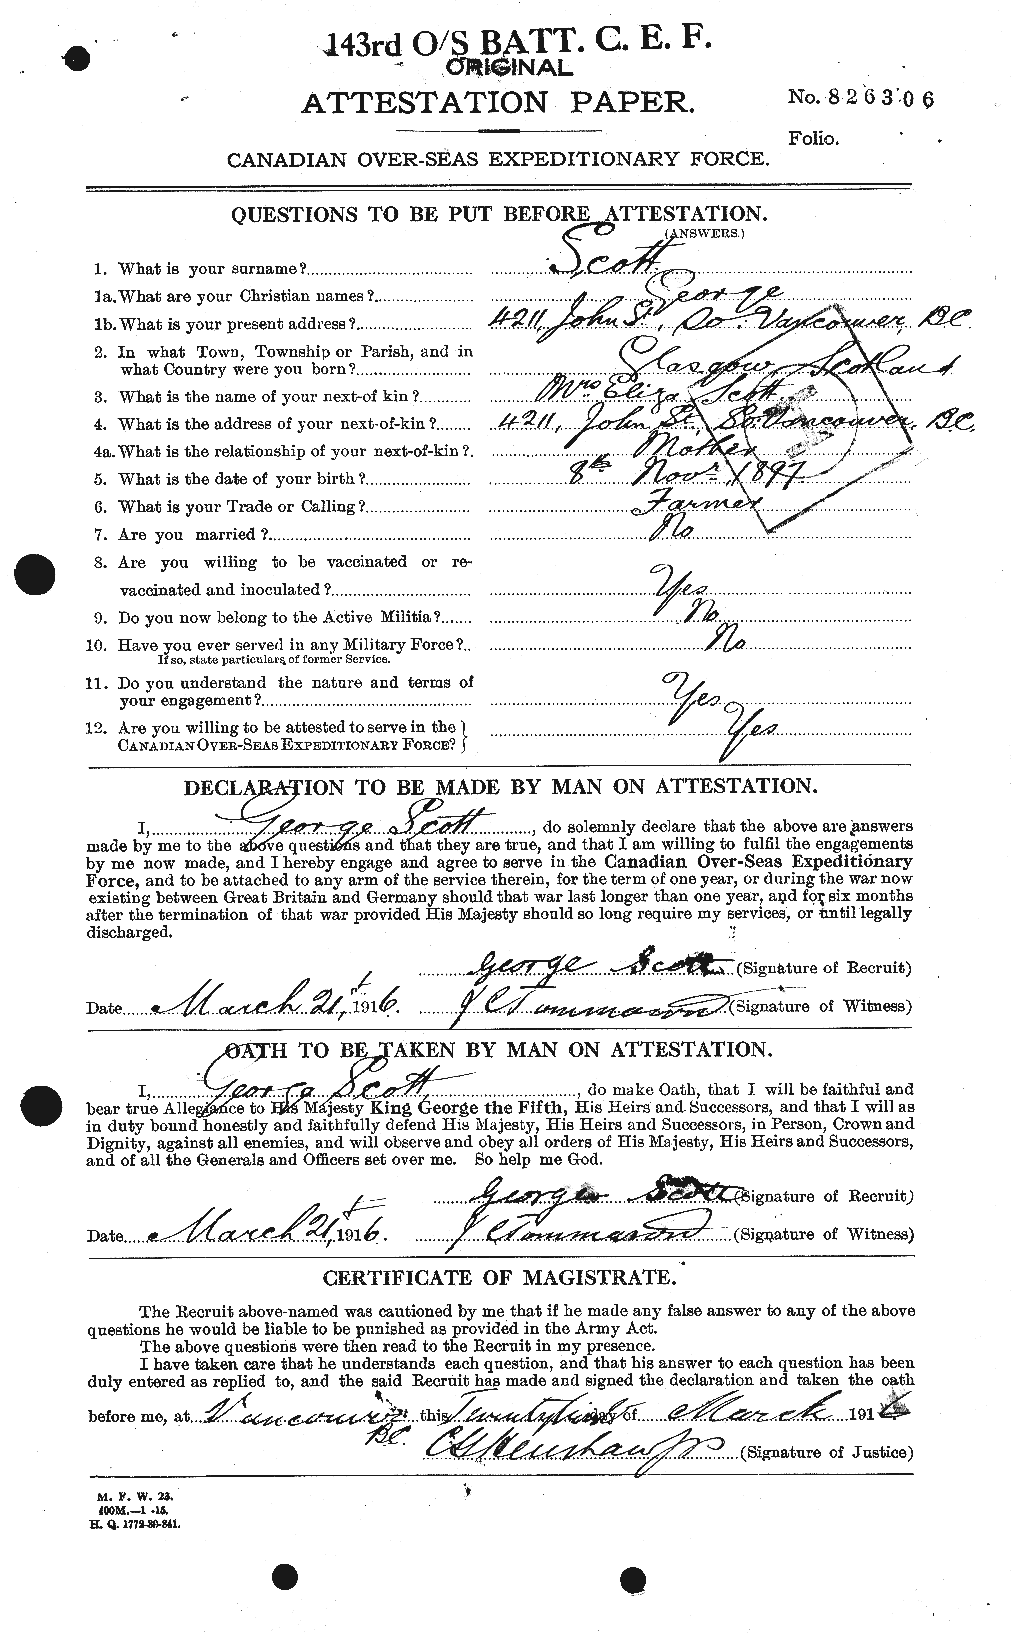 Personnel Records of the First World War - CEF 084365a